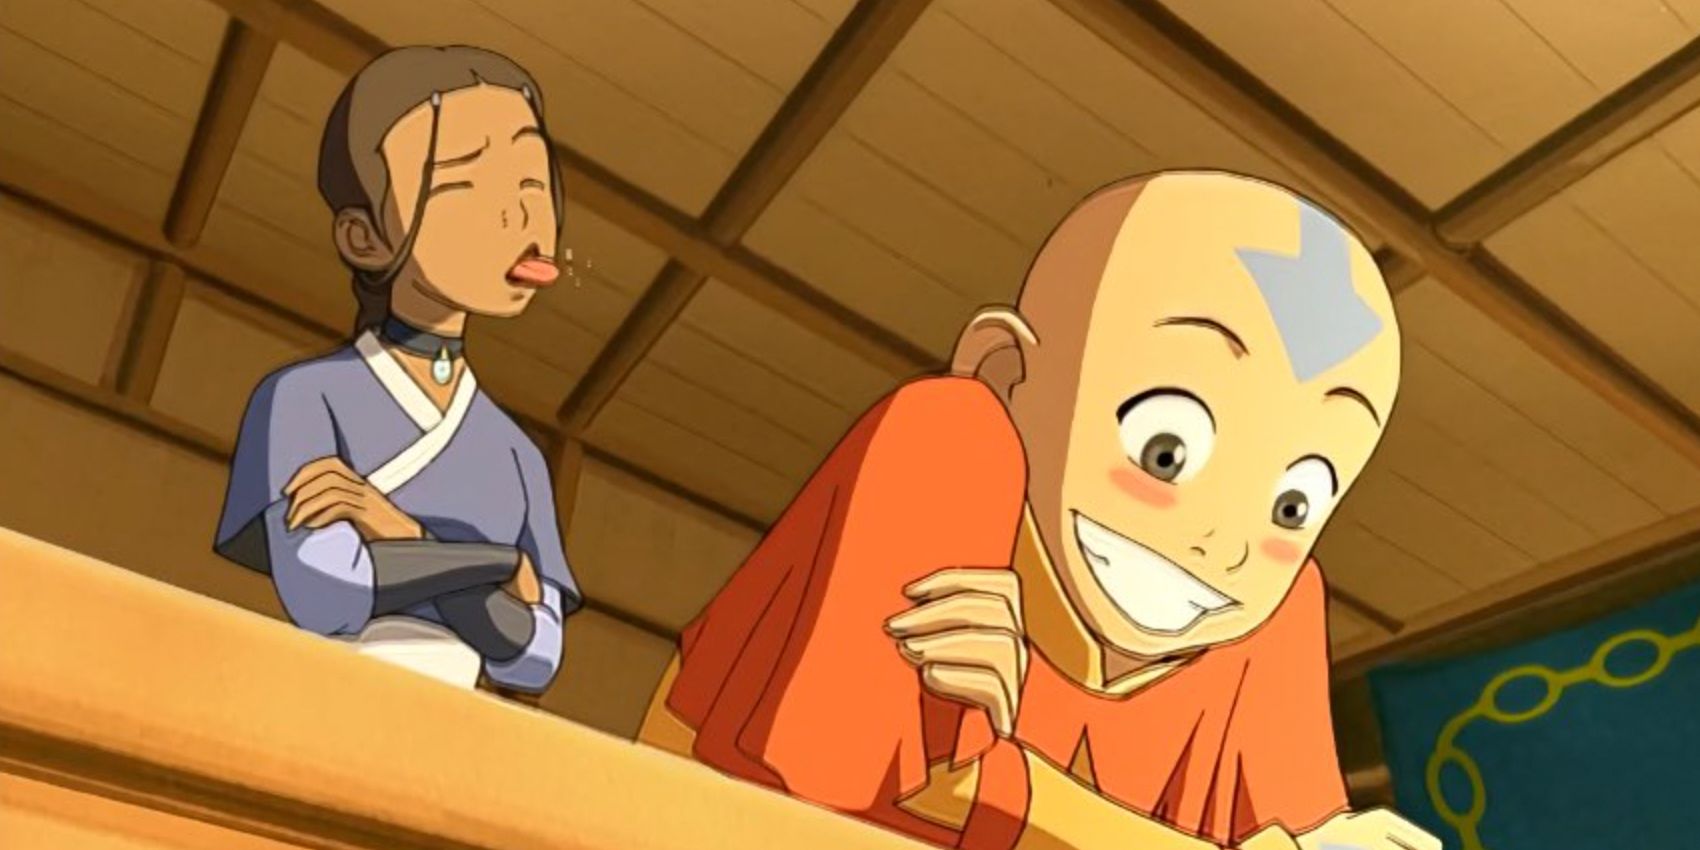 Katara sticking her tongue out while Aang blushes at attention he receives in the animated Avatar the Last Airbender series